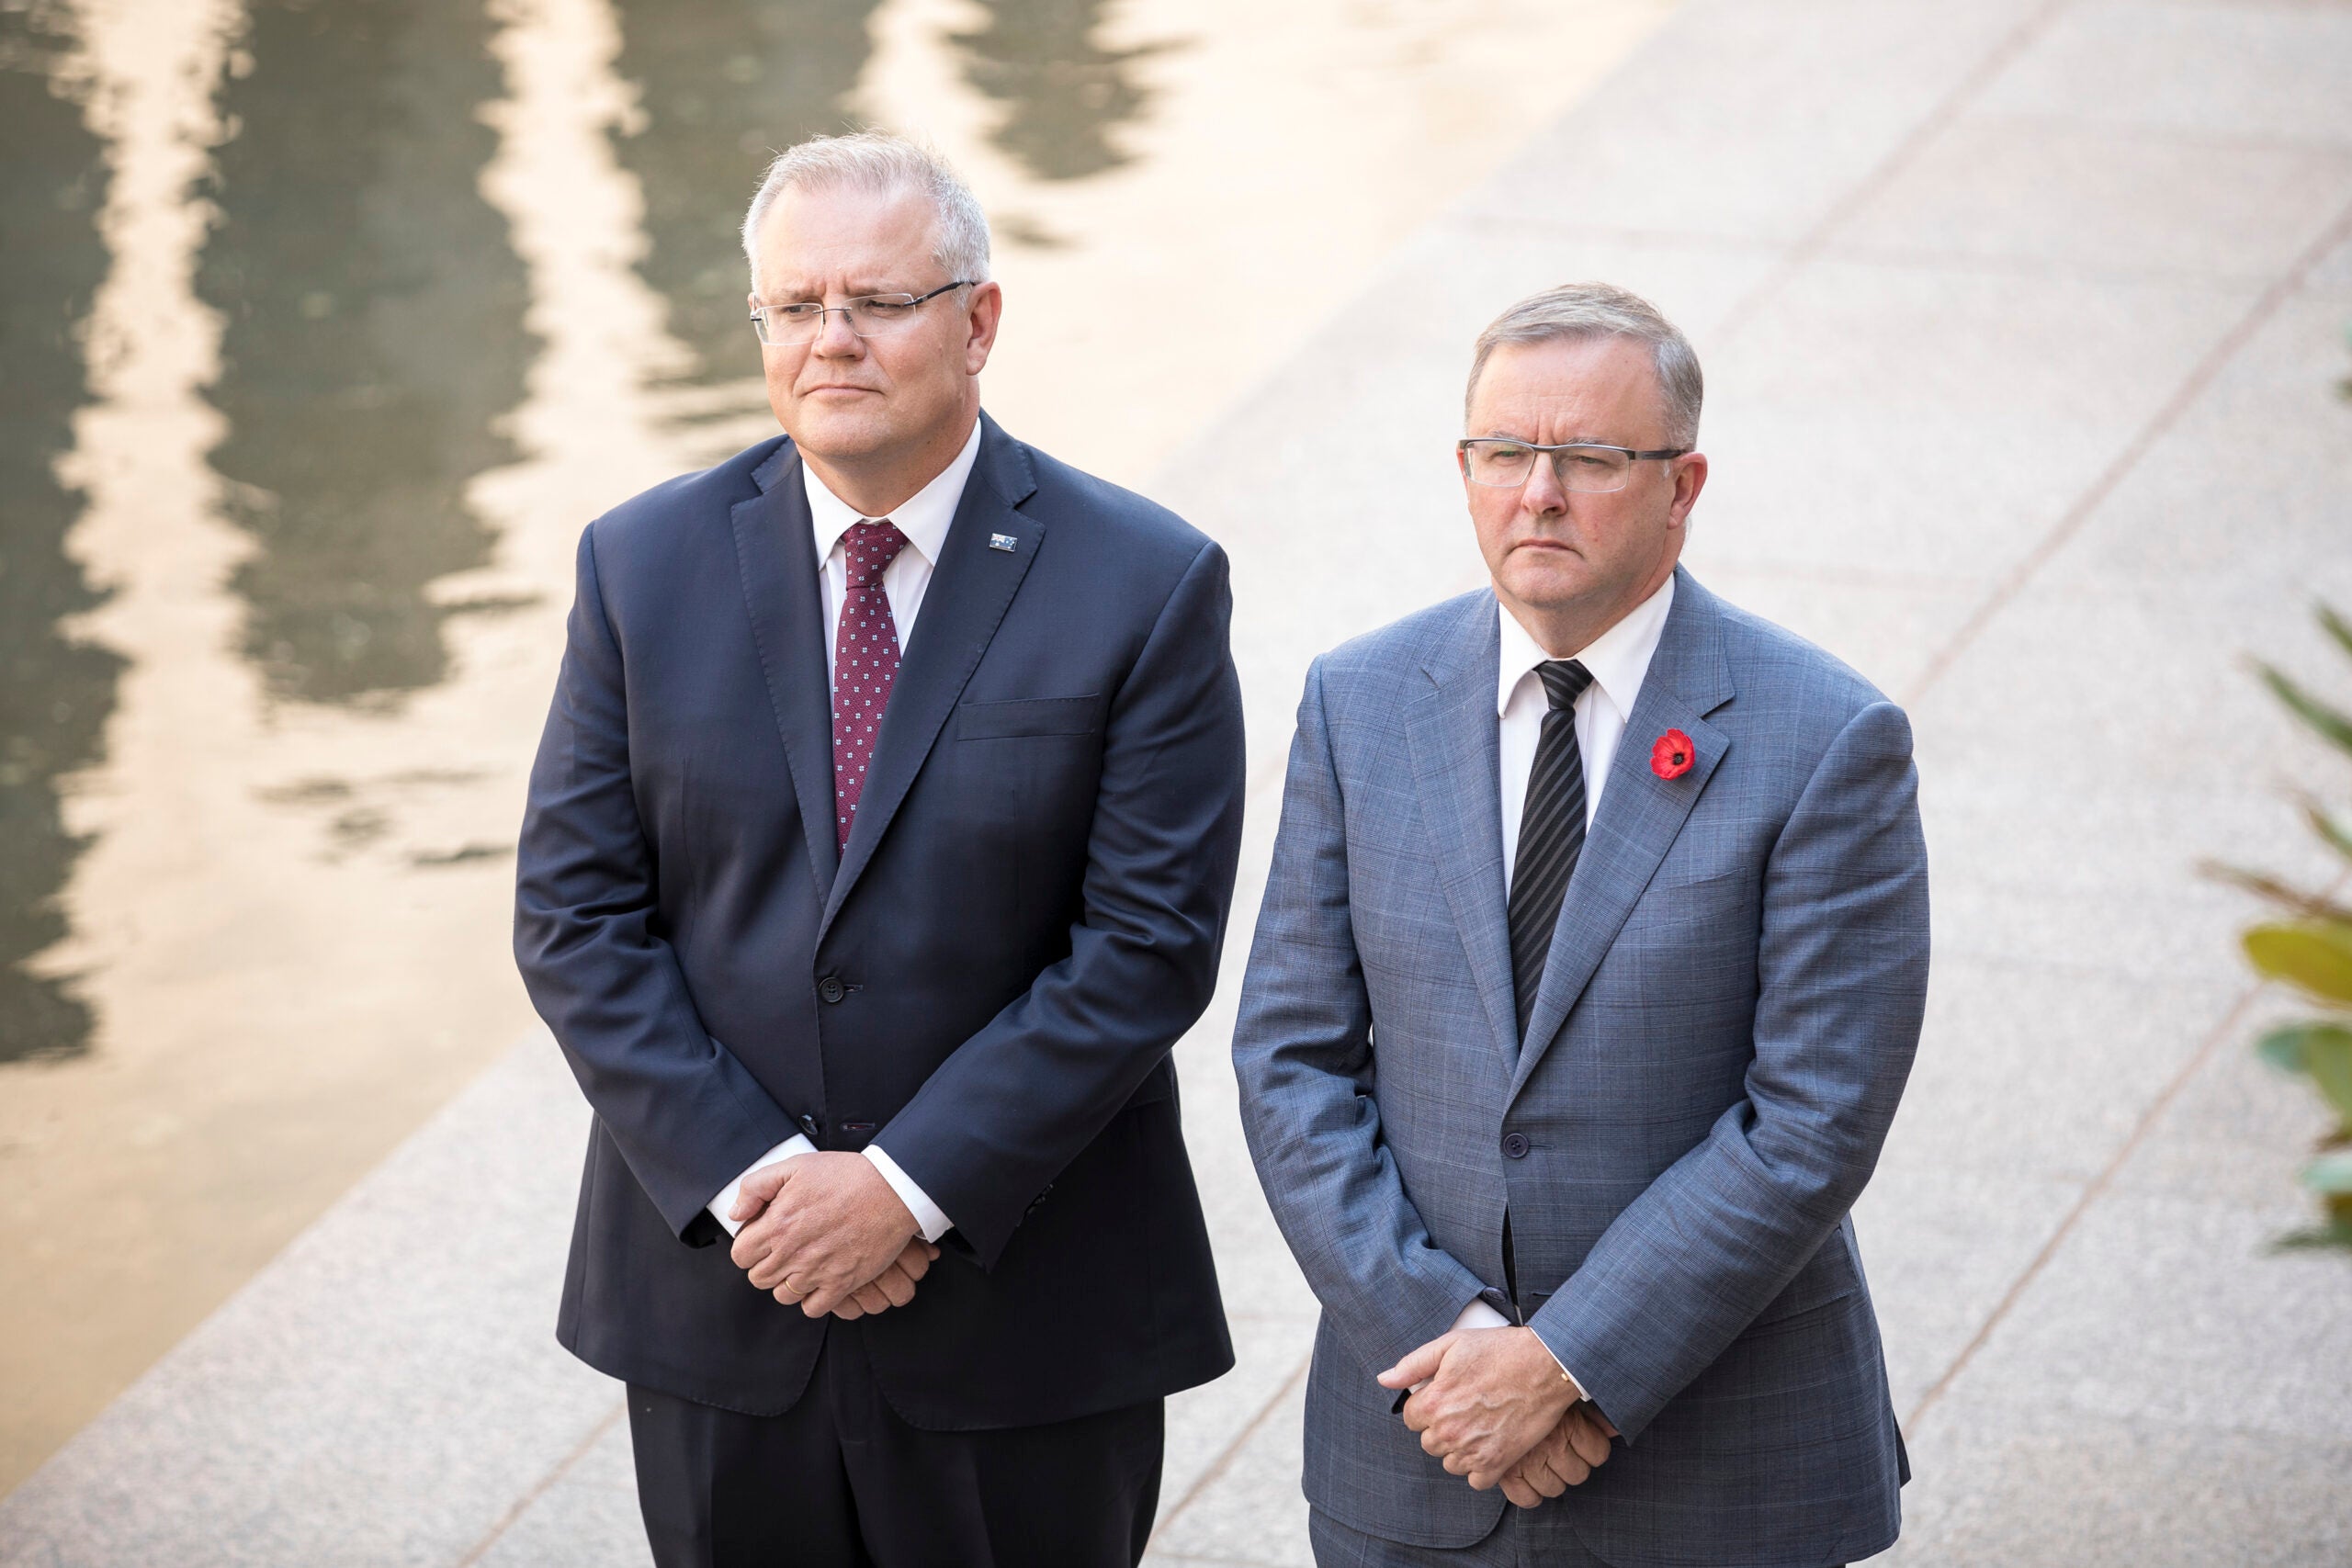 (l-r) Prime Minister of Australia Scott Morrison and Leader of the Opposition the Honourable Anthony Albanese at the Last Post Ceremony was held at the Australian War Memorial to mark the opening of the 2020 Parliament in Canberra.  *** Local Caption *** The Last Post Ceremony was held at the Australian War Memorial to mark the opening of the 2020 Parliament on 3 February, 2020 in Canberra. 

Each Last Post Ceremony commemorates the personal story of one of the more than 102,500 Australians whose names are recorded on the Memorials Roll of Honour, in recognition of the service and sacrifice of all Australians who have died in war and on operations.

This ceremony commemorated the service and sacrifice of Sister Alma May Beard, 13th Australian General Hospital, Royal Australian Army Nursing Service, who was among a group of nurses executed by the Japanese on Banka Island in 1942. She was 28 years old.